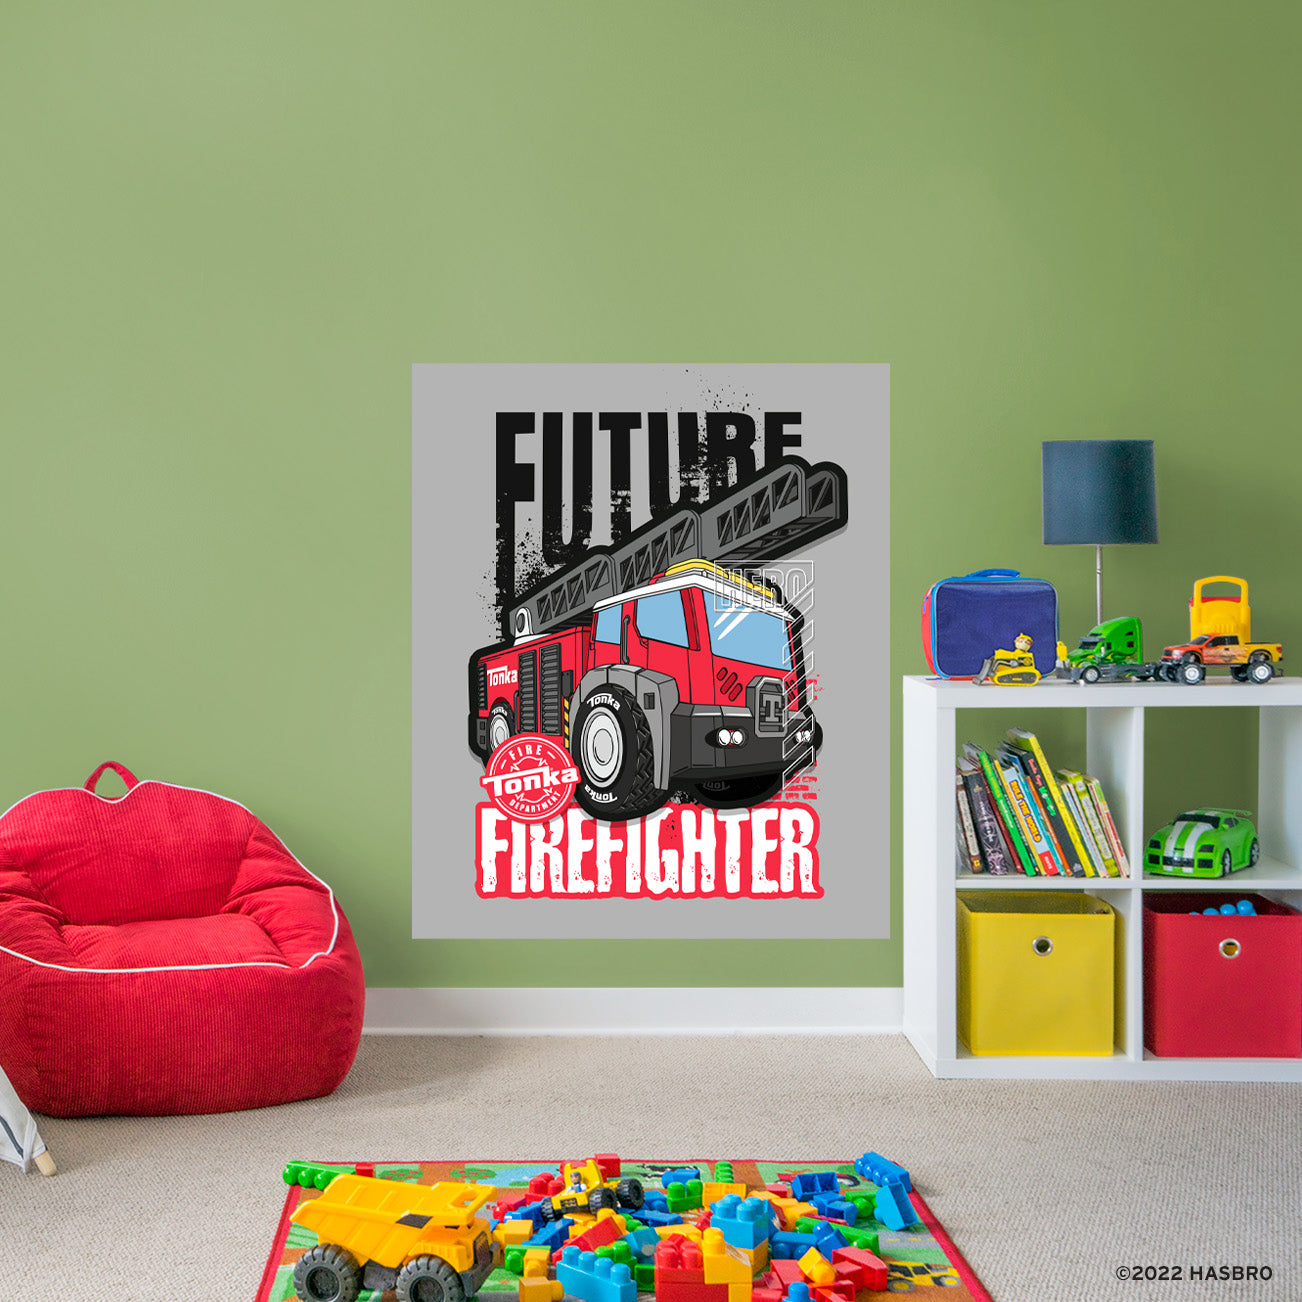 Tonka Trucks: Fire Truck Future Firefighter Poster - Officially Licensed Hasbro Removable Adhesive Decal